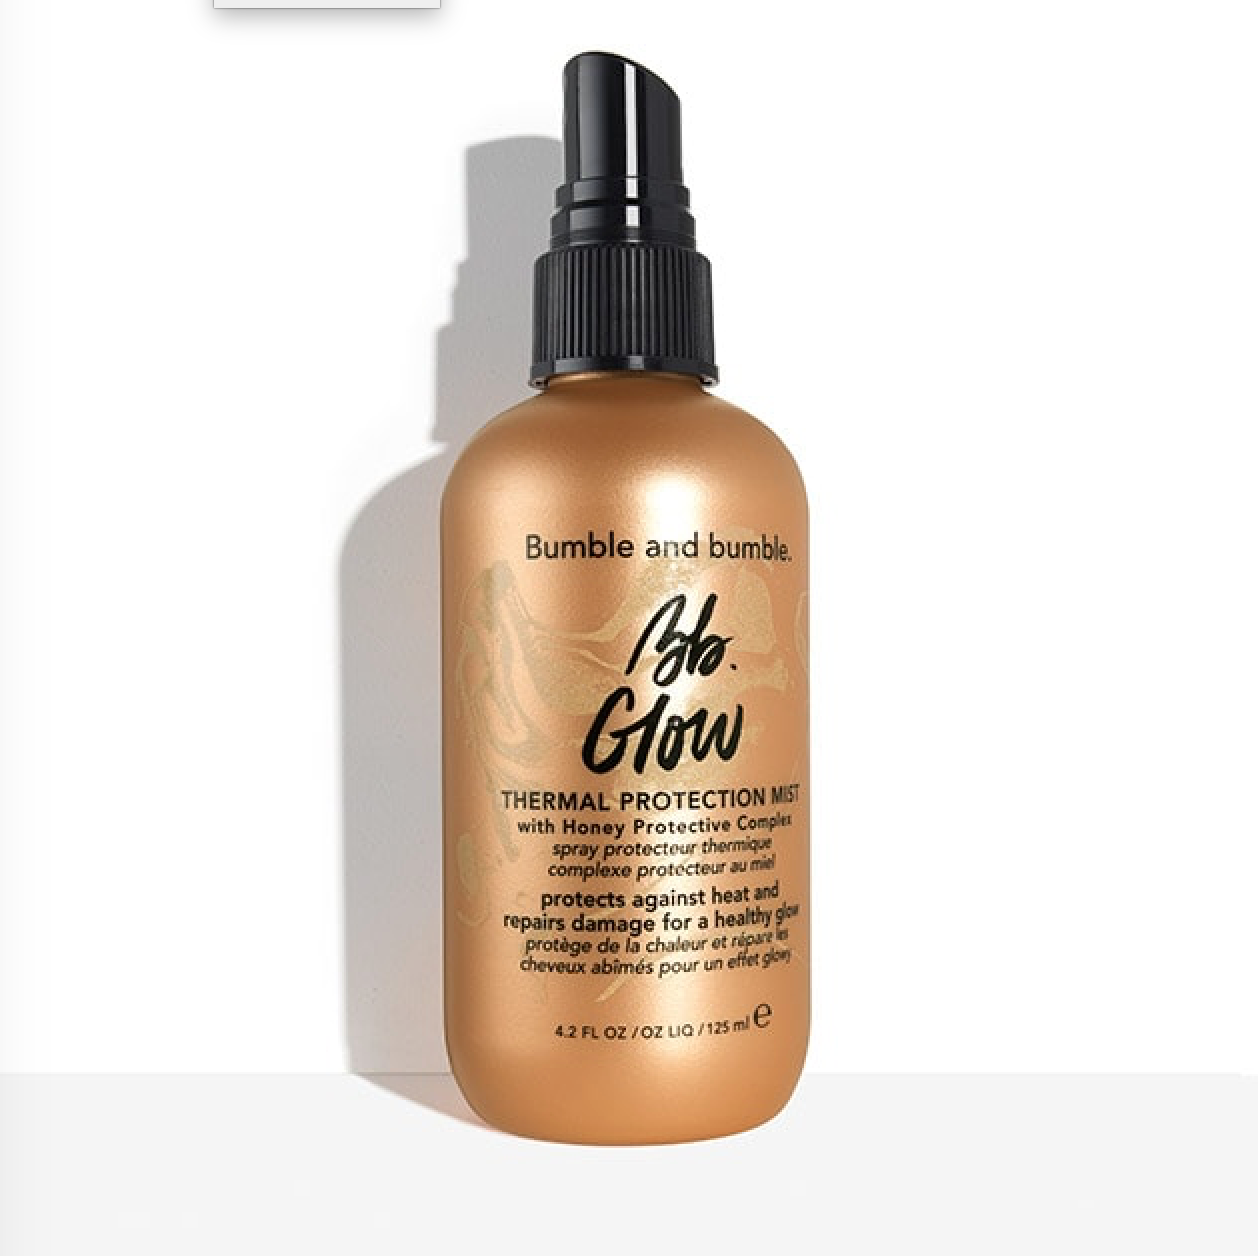 Bumble And Bumble Glow Thermal Protection Mist